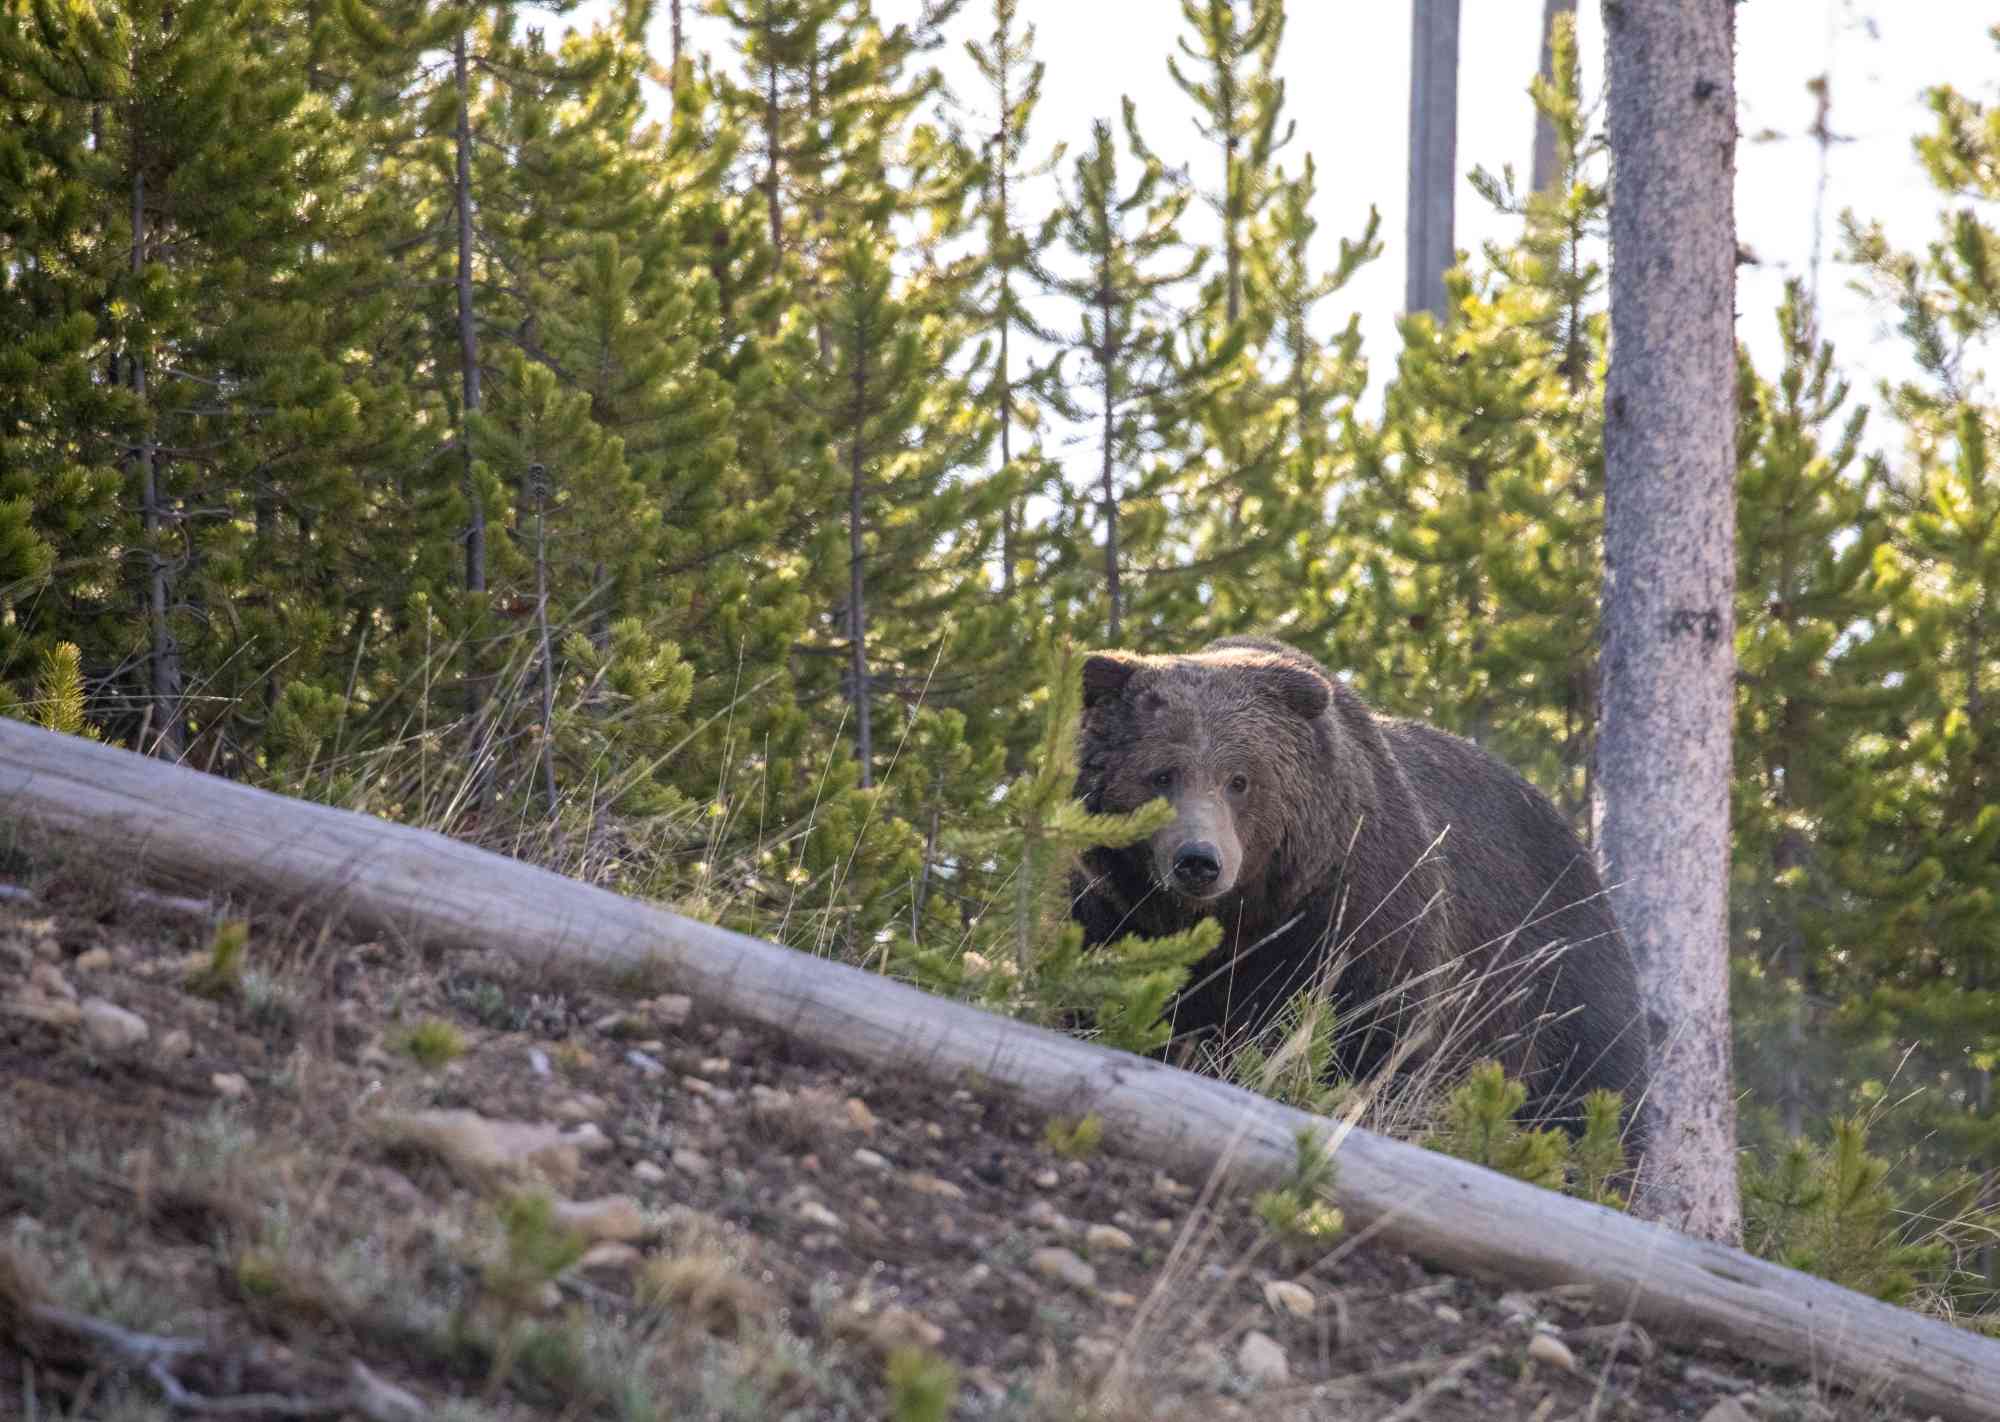 2020.05.19 - Grizzly Bear in Woods - Yellowstone National Park - Wyoming - NPS-Jim Peaco